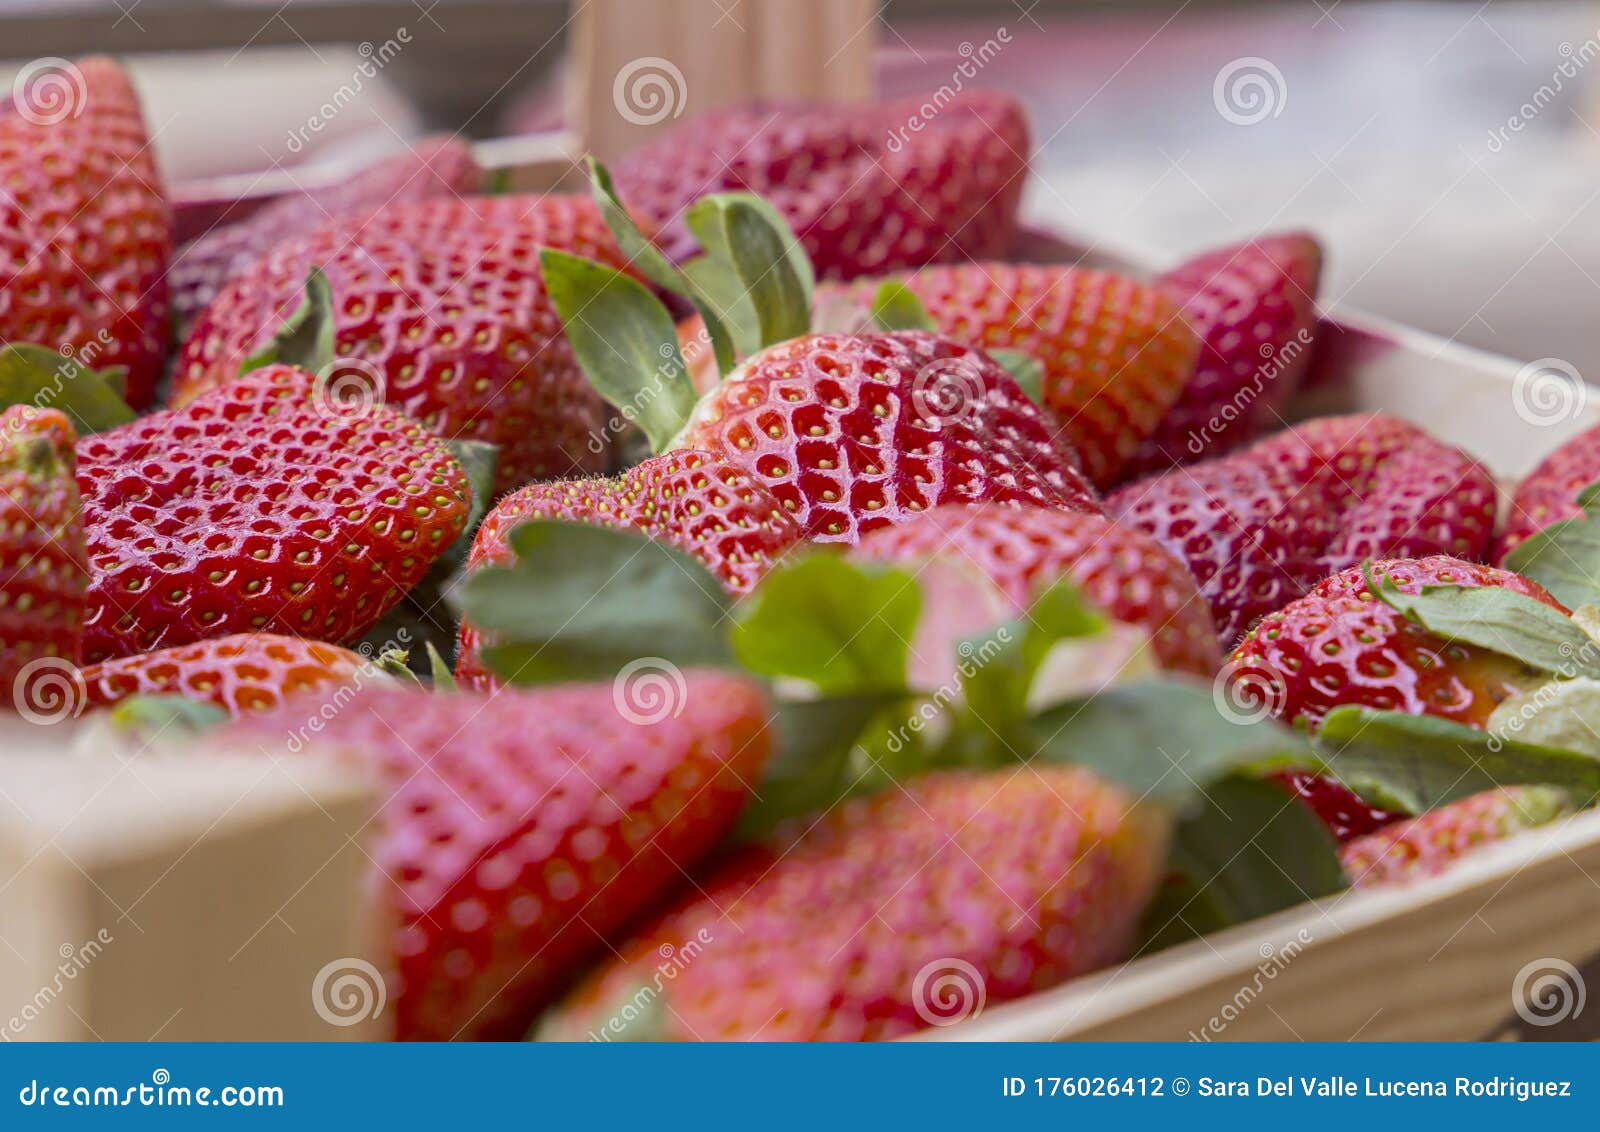 natural background of red strawberries on the table ready to eat